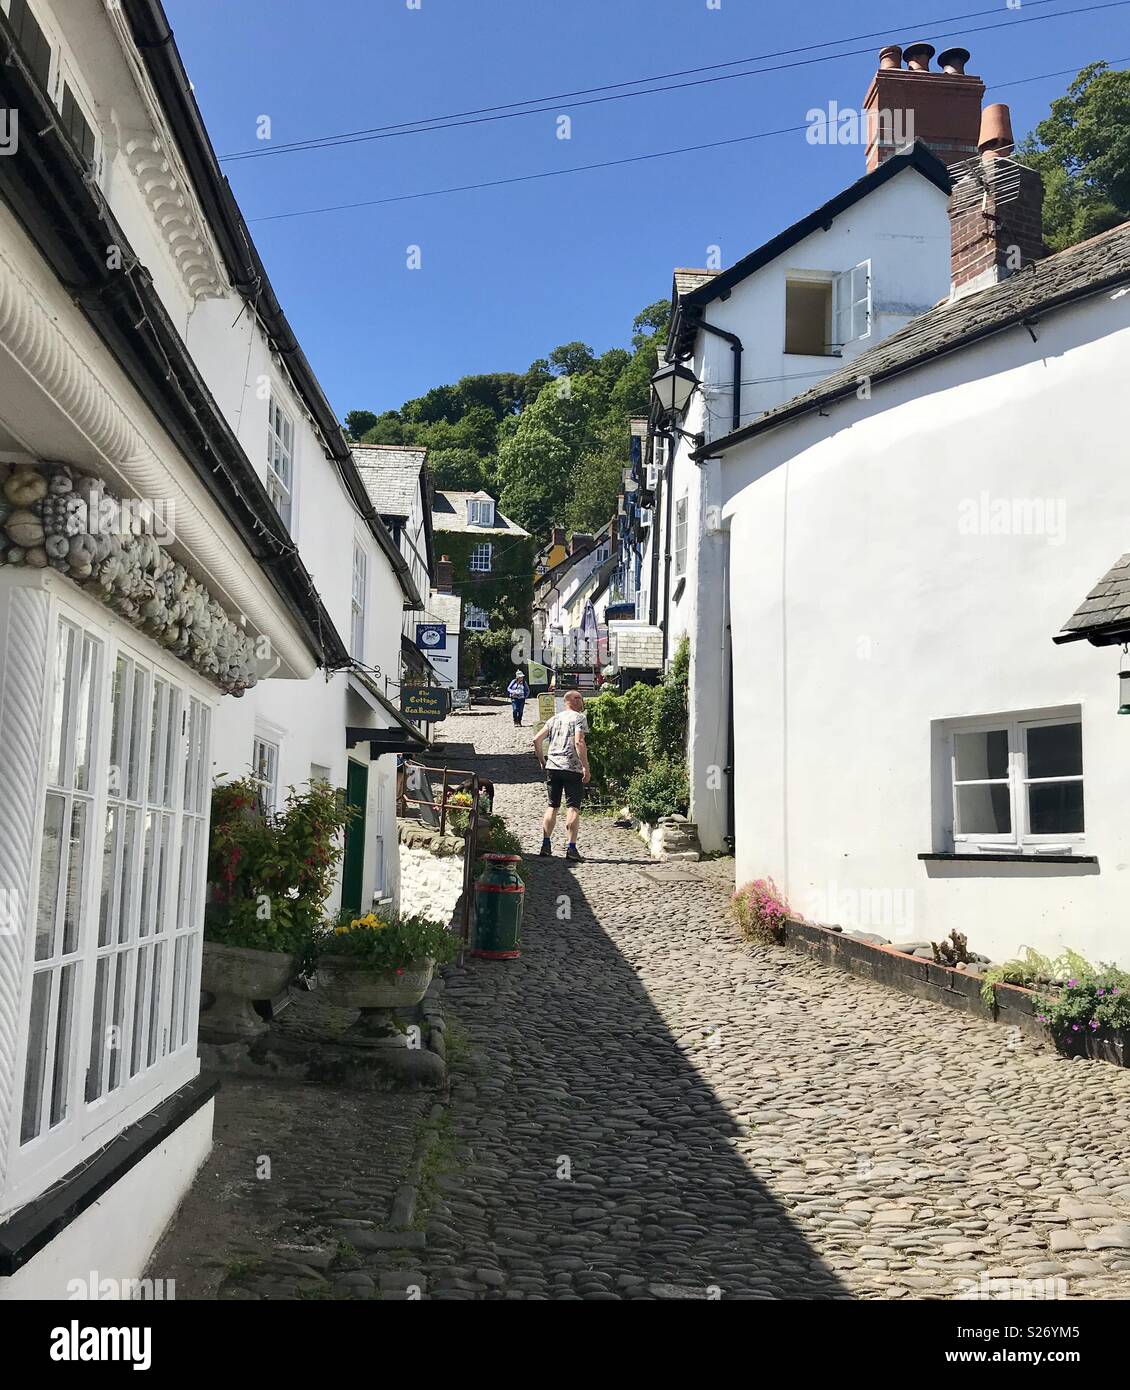 Walking up the cobbled street in Clovelly Devon Stock Photo